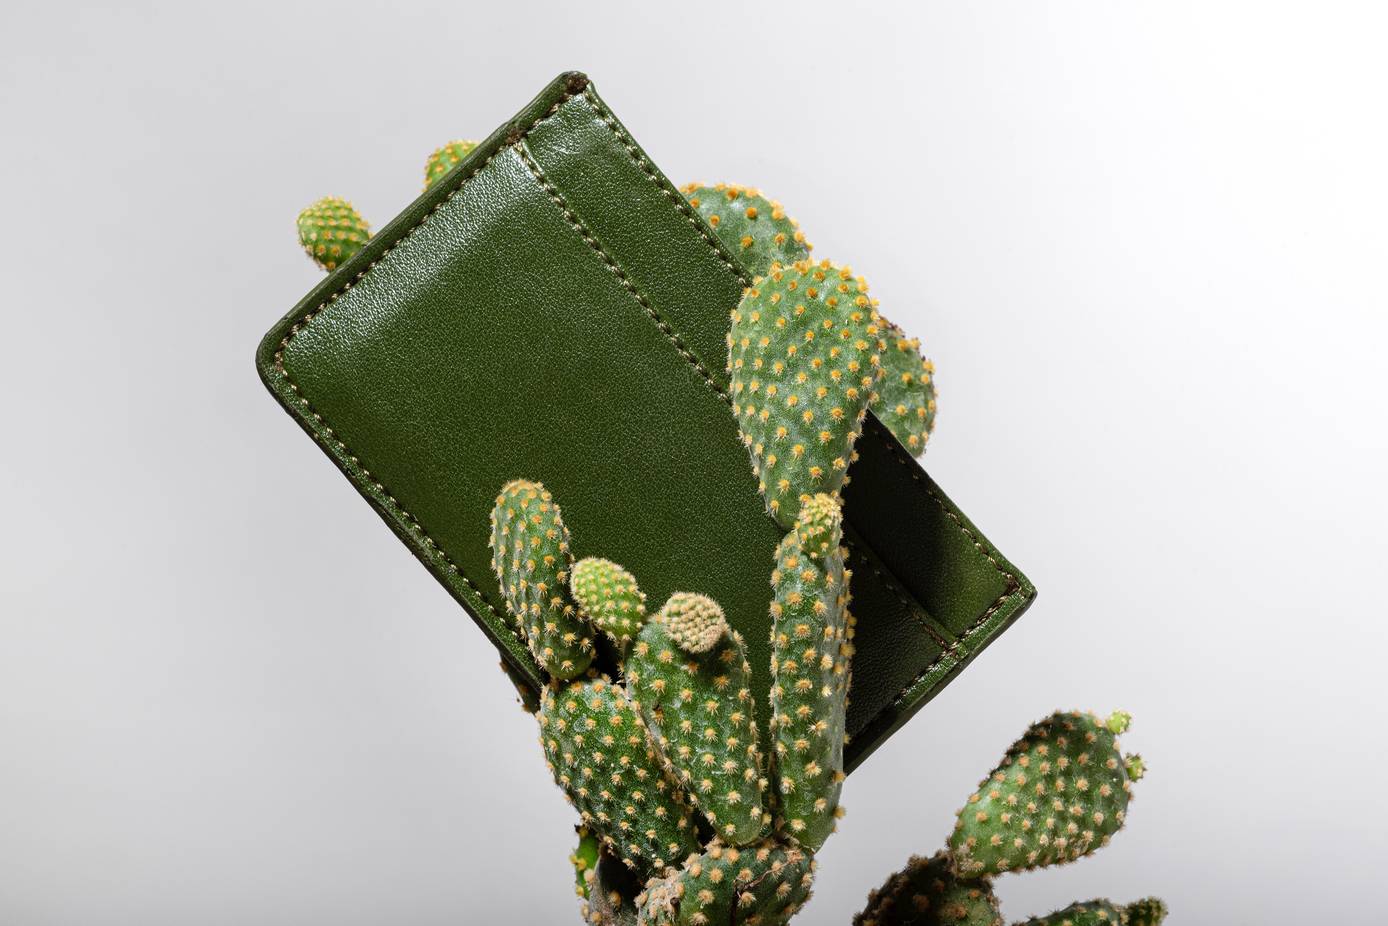 Fashion Company Is Making Products With Mexican Cactus - EcoWatch